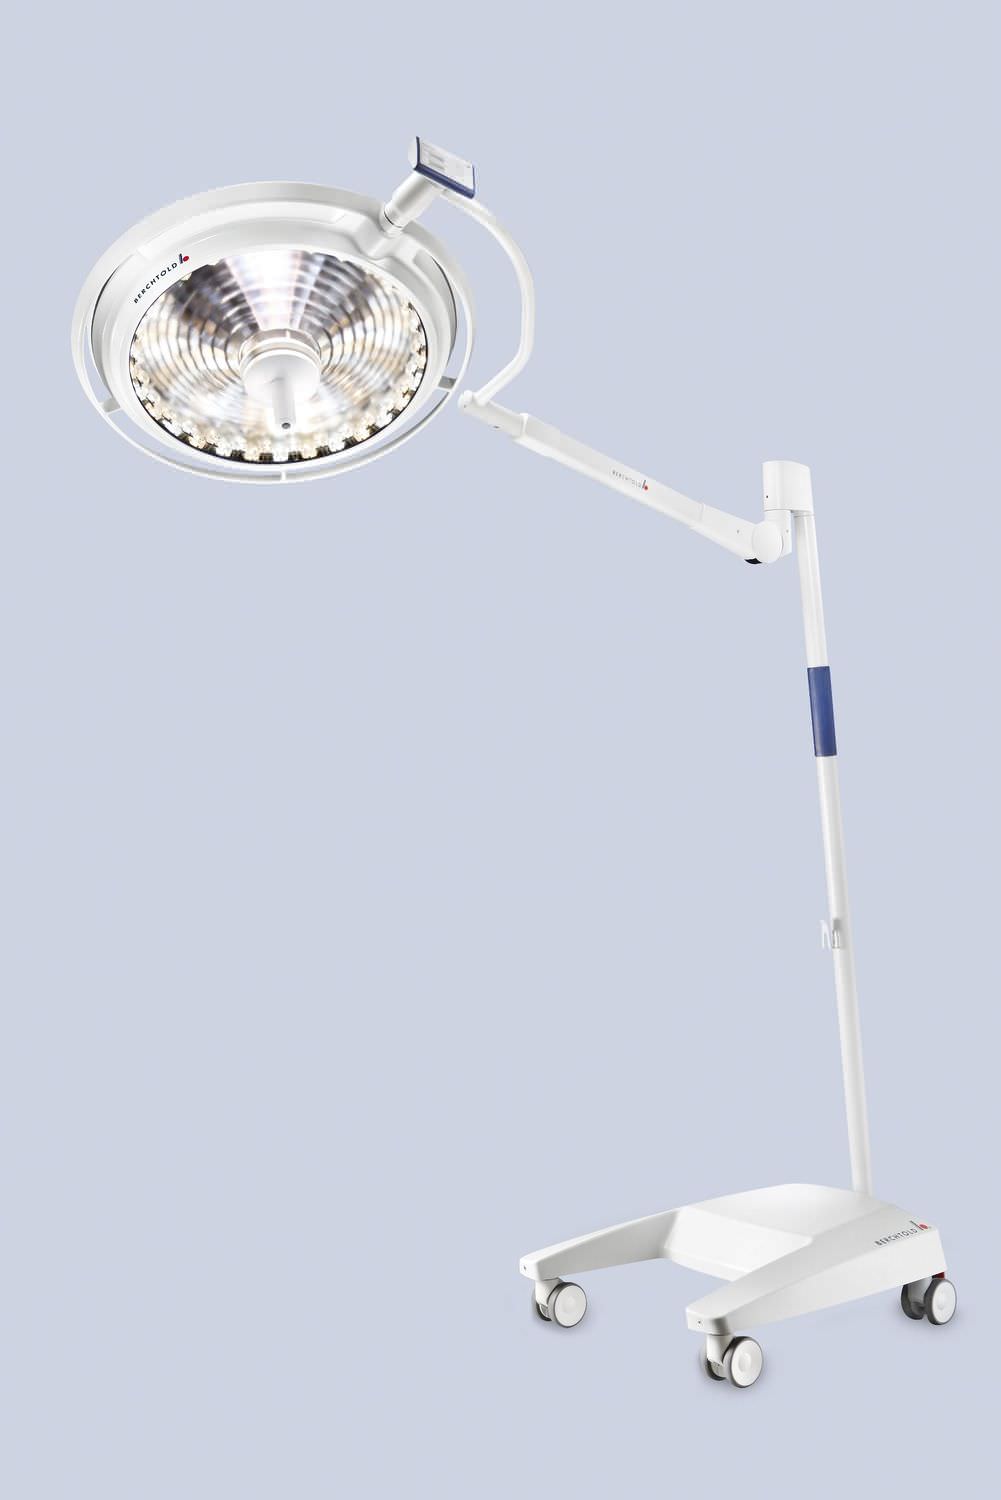 LED surgical light / ceiling-mounted / 1-arm 160 000 lux | CHROMOPHARE F 628 Berchtold